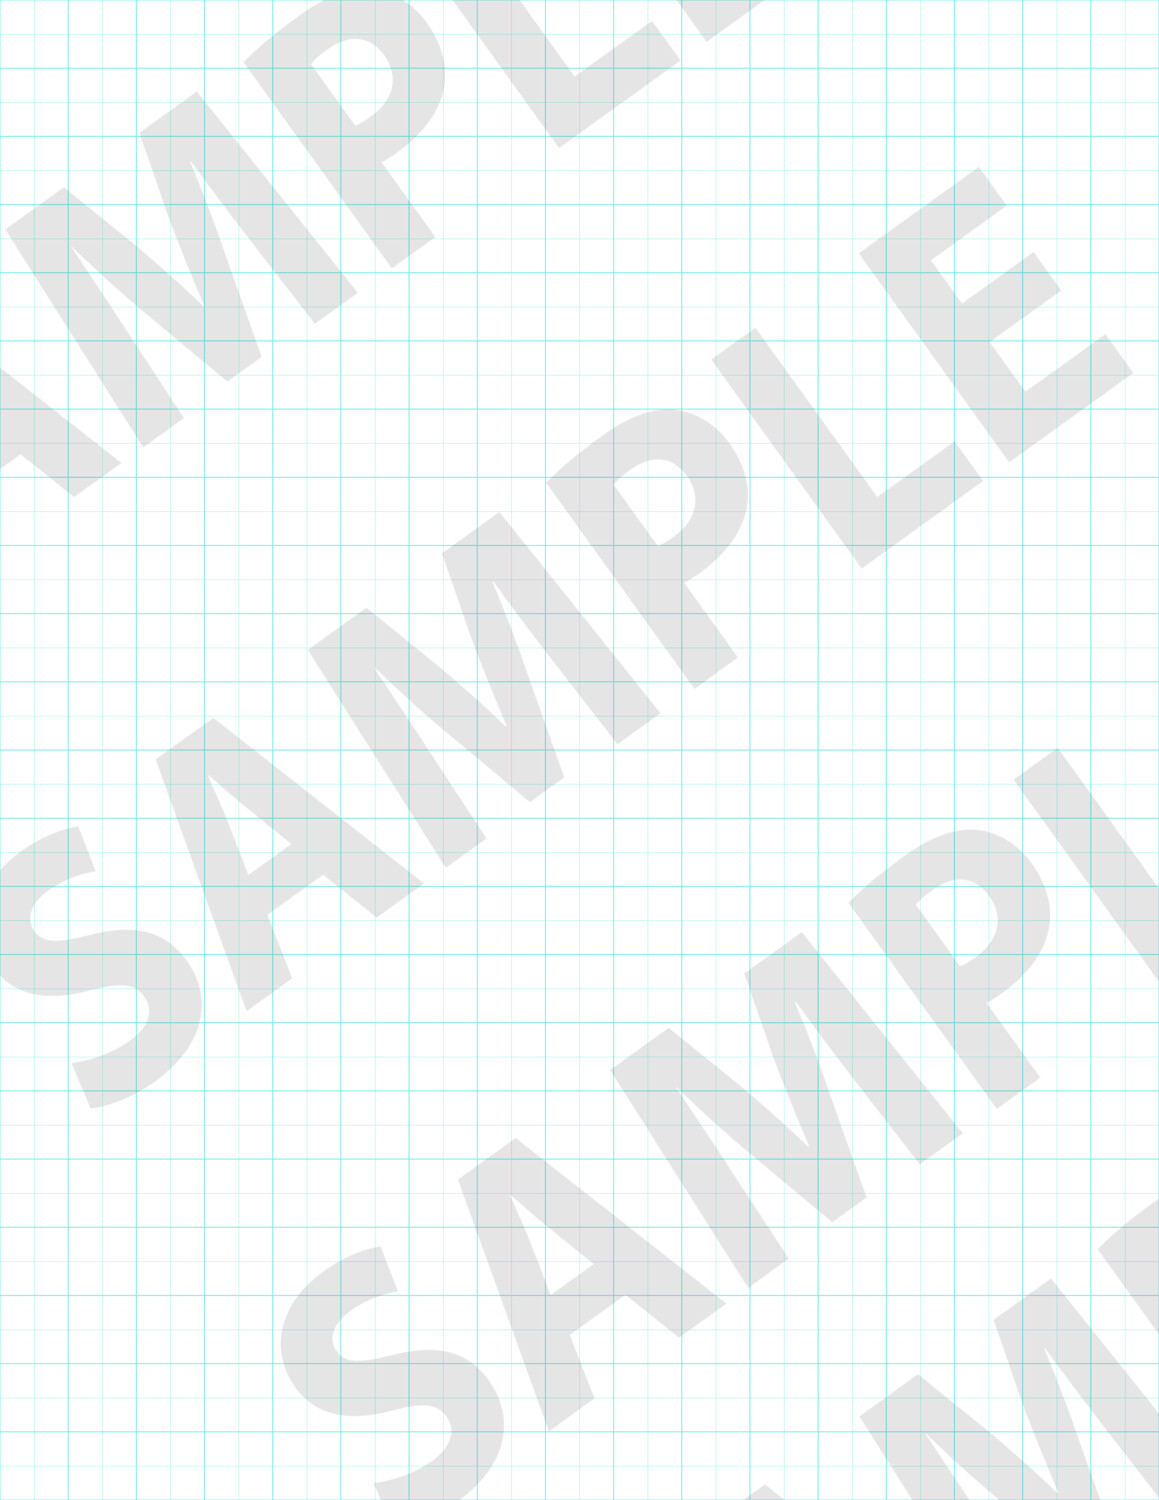 Turquoise 1 - Large Grid Paper